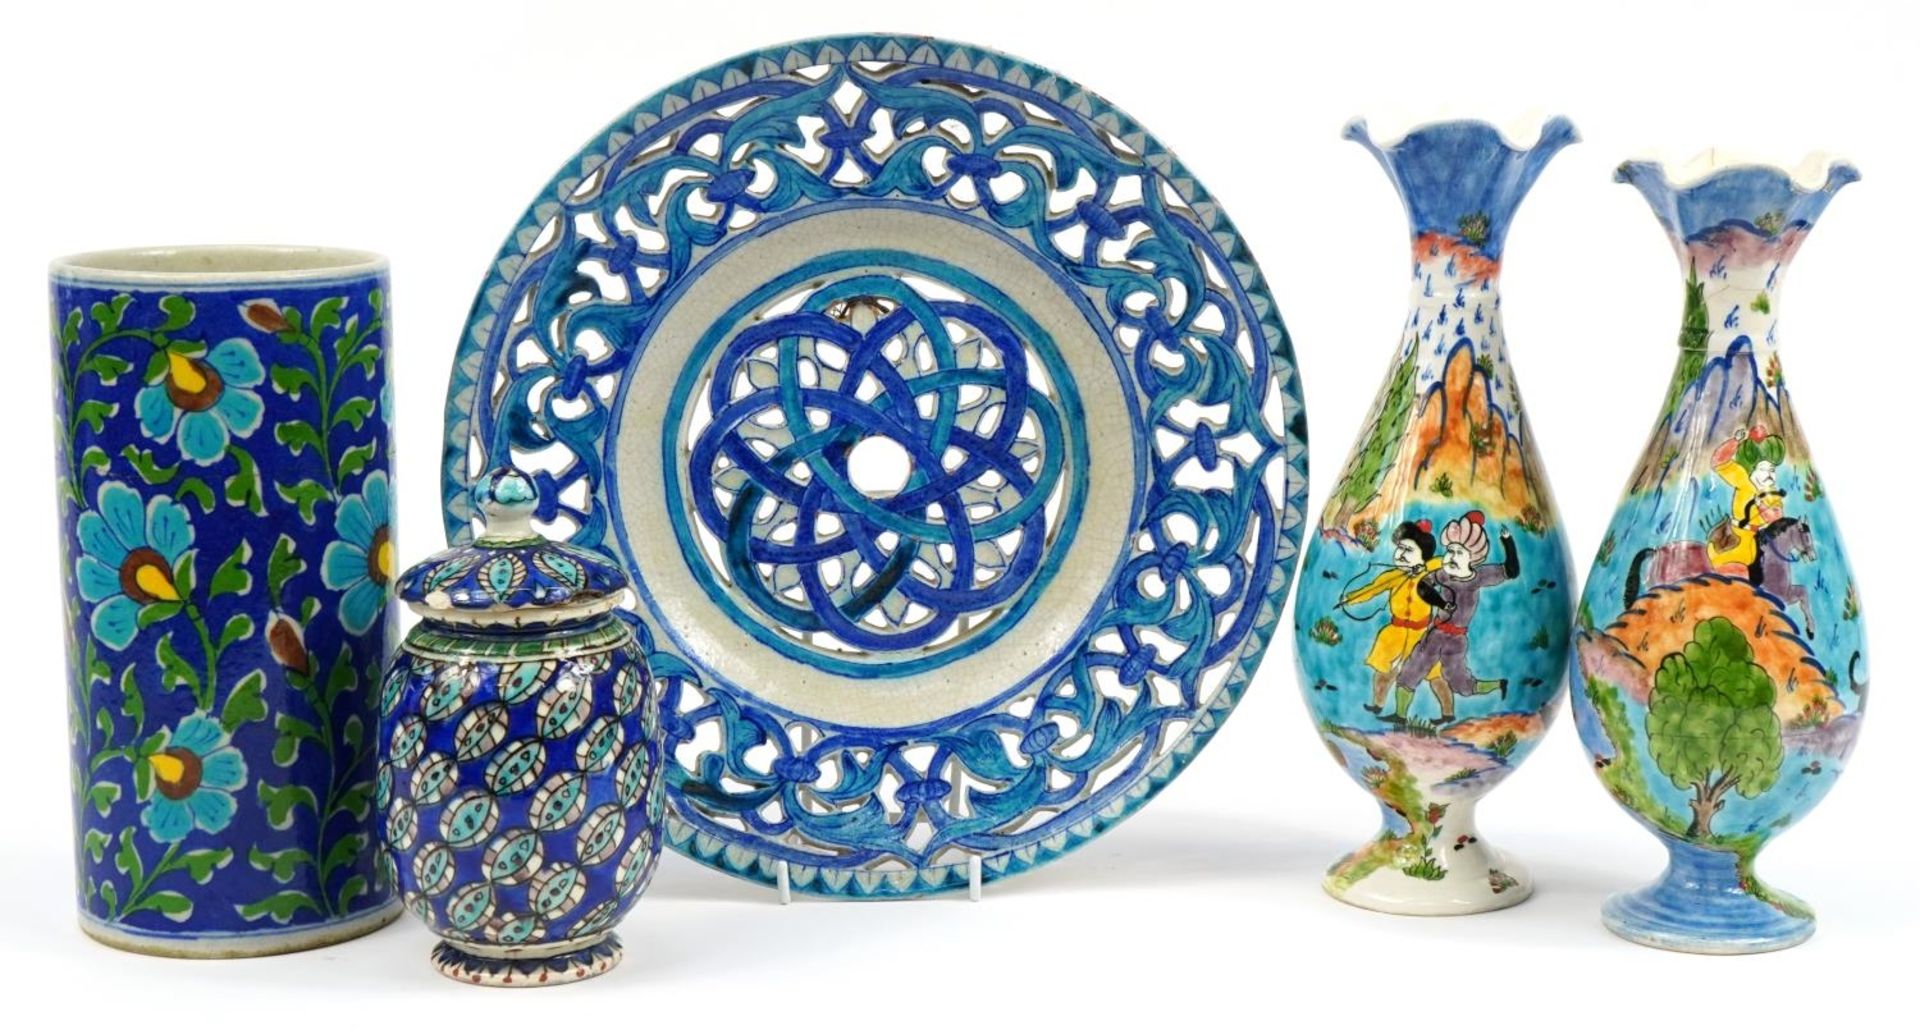 Turkish pottery including a pair of vases hand painted with huntsmen on horseback, pierced plate and